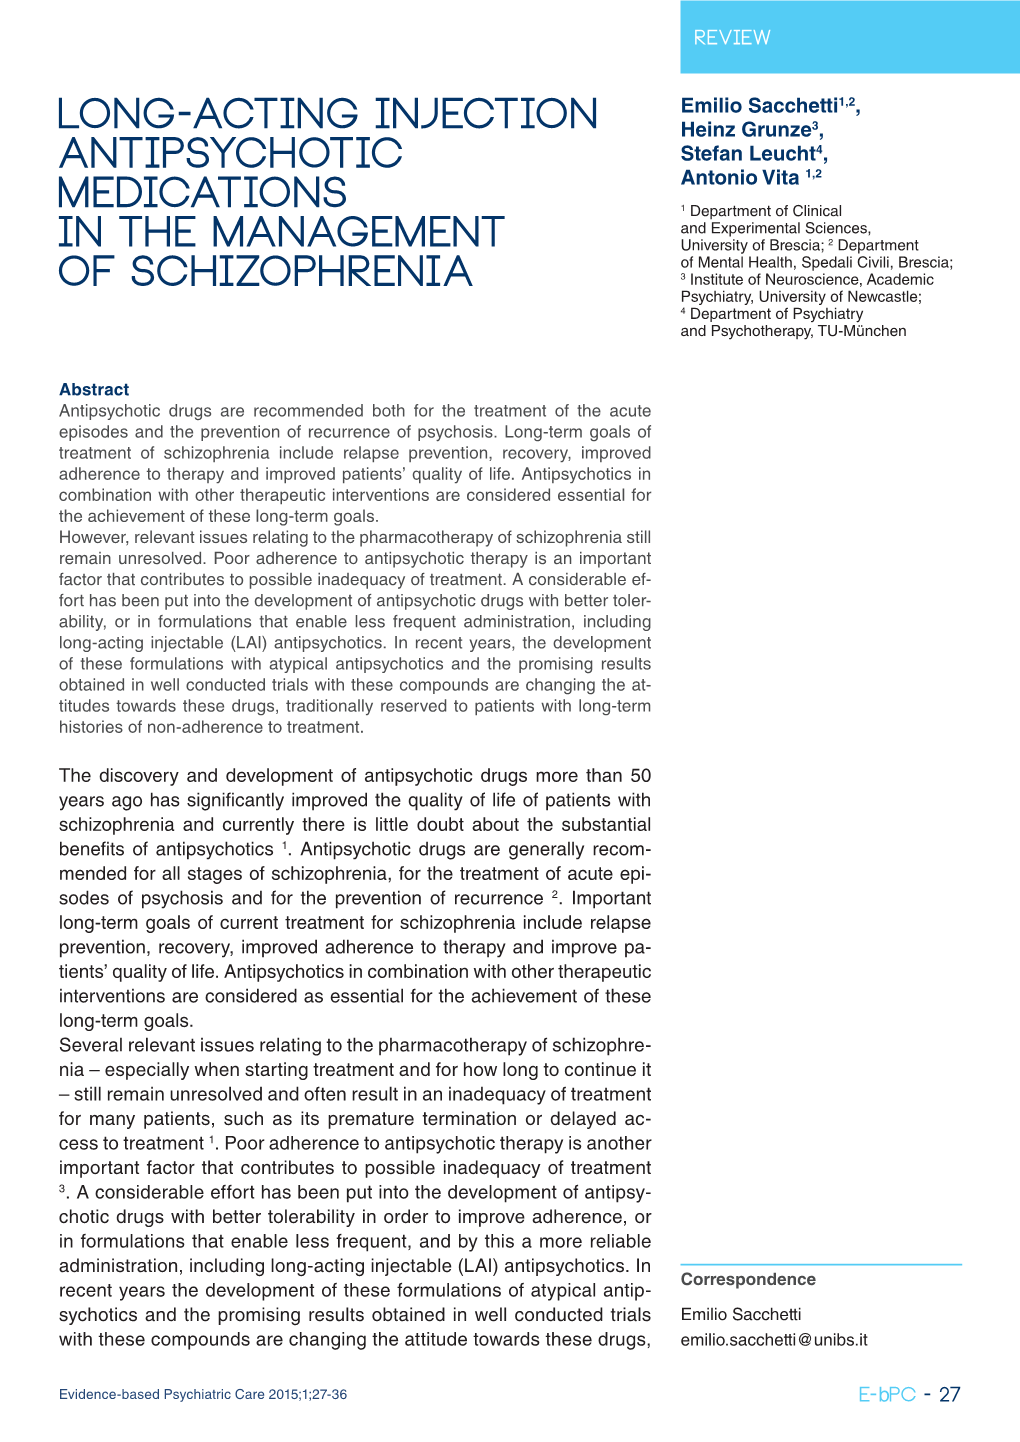 Long-Acting Injection Antipsychotic Medications in the Management of Schizophrenia a First Episode of Psychosis Should Be Continued for Lations